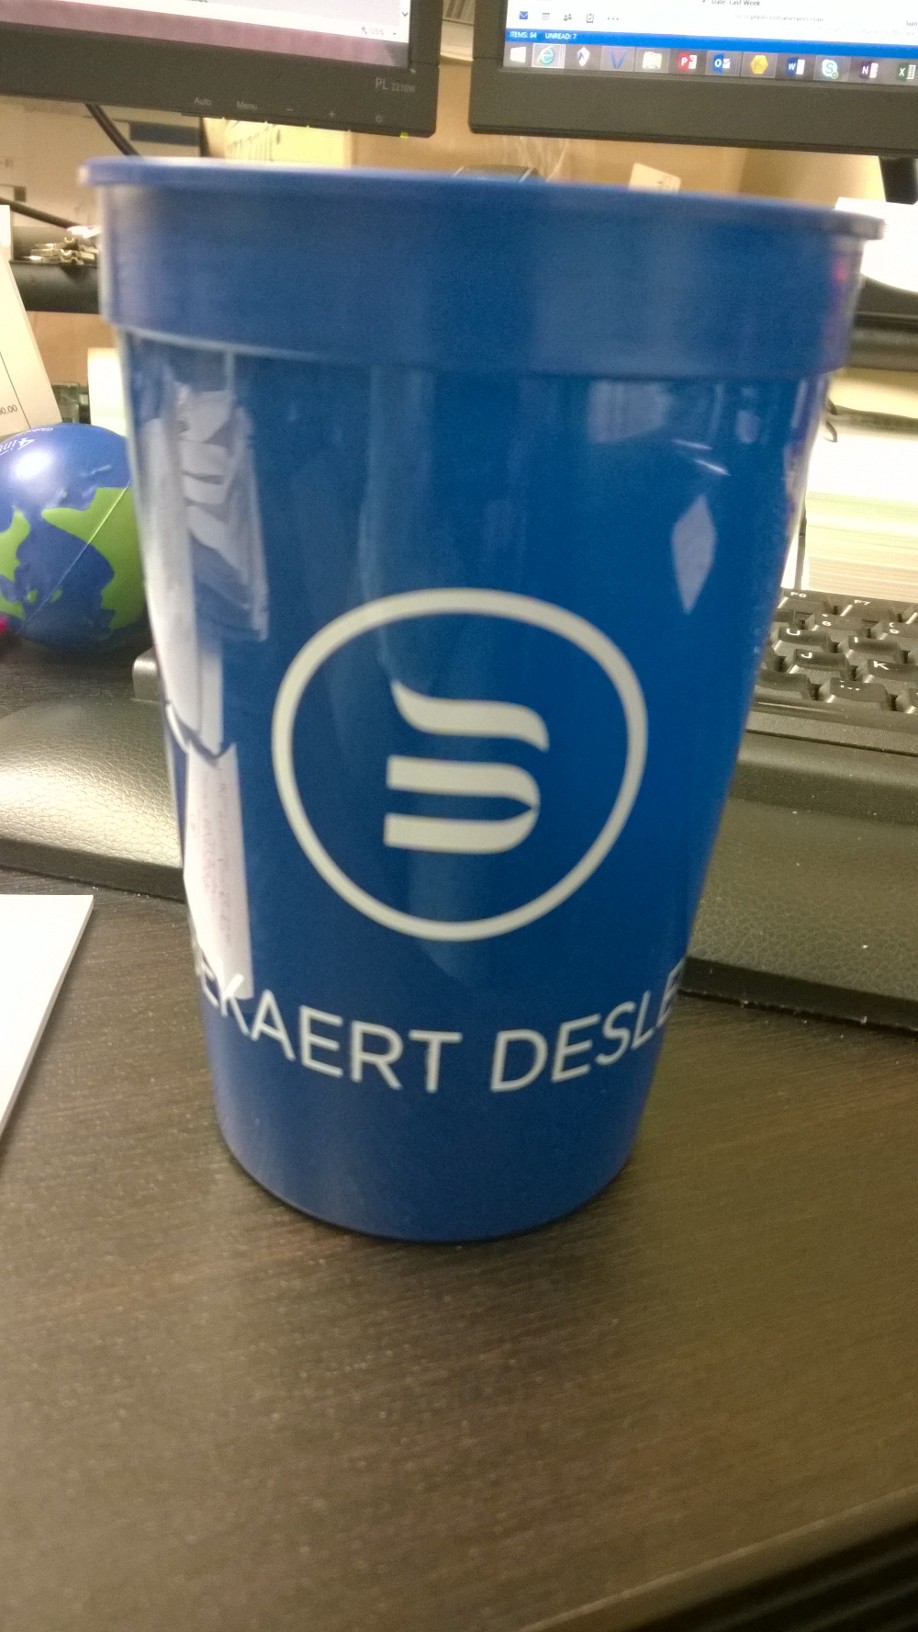 a blue cup with a white logo on it